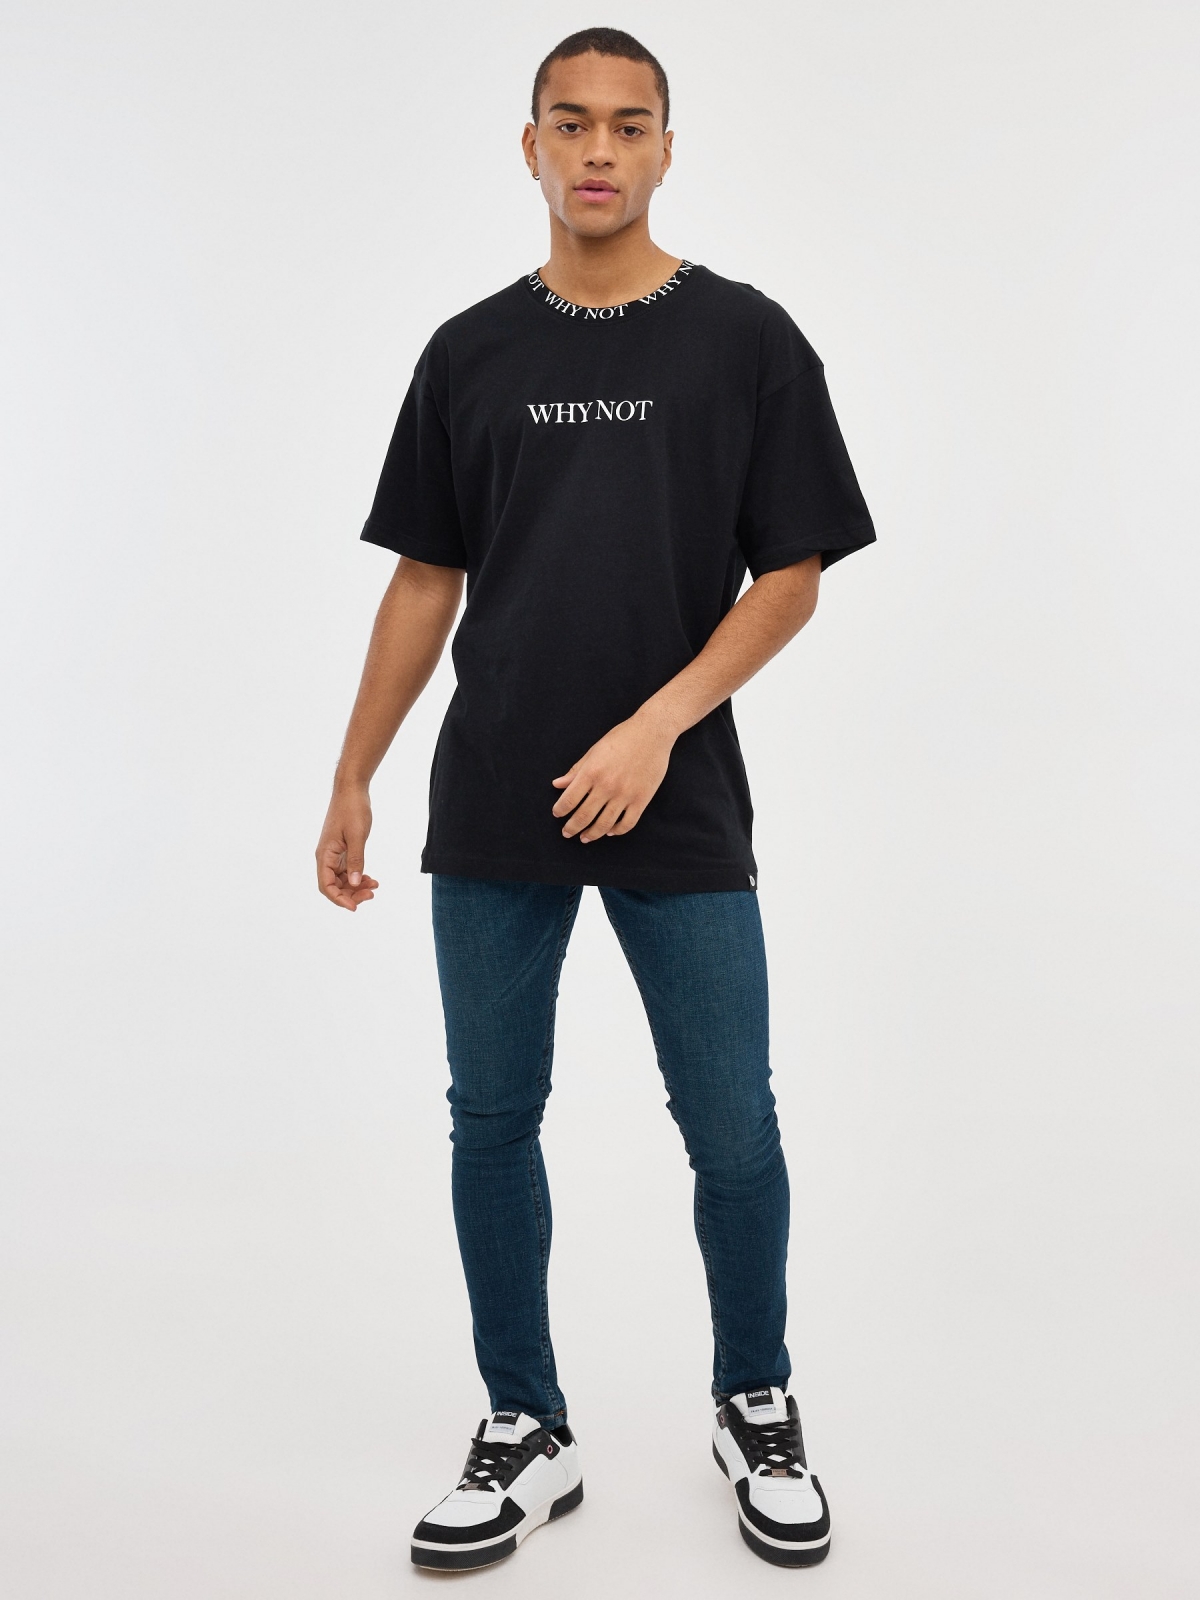 Why Not T-shirt preto vista geral frontal